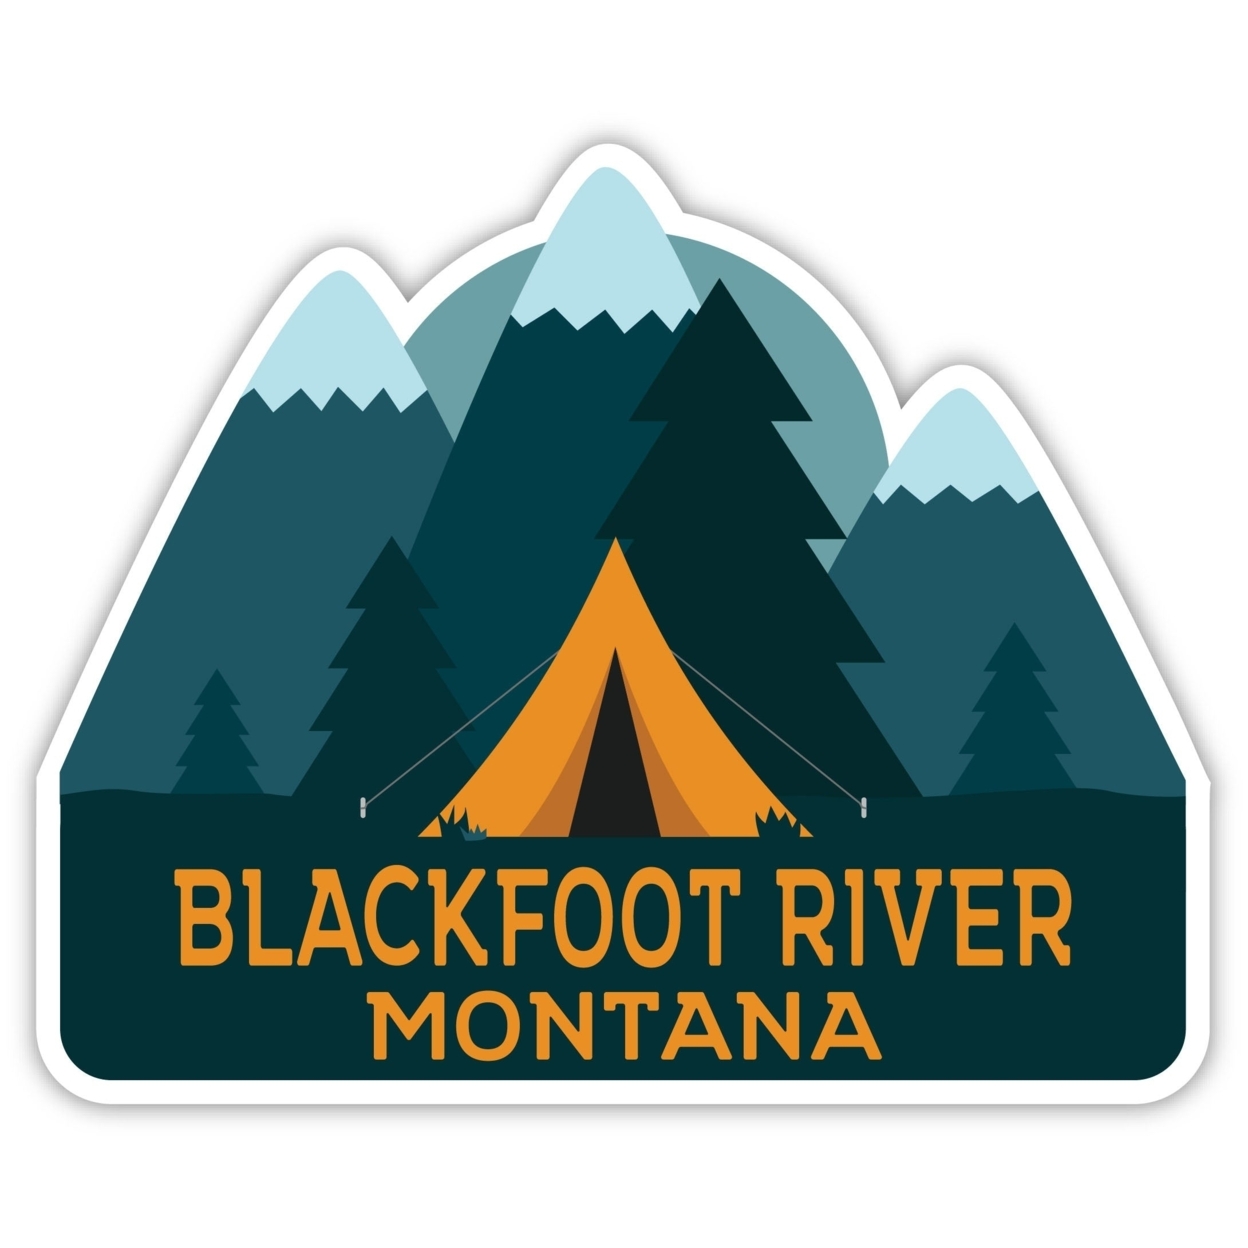 Blackfoot River Montana Souvenir Decorative Stickers (Choose Theme And Size) - 4-Pack, 8-Inch, Tent